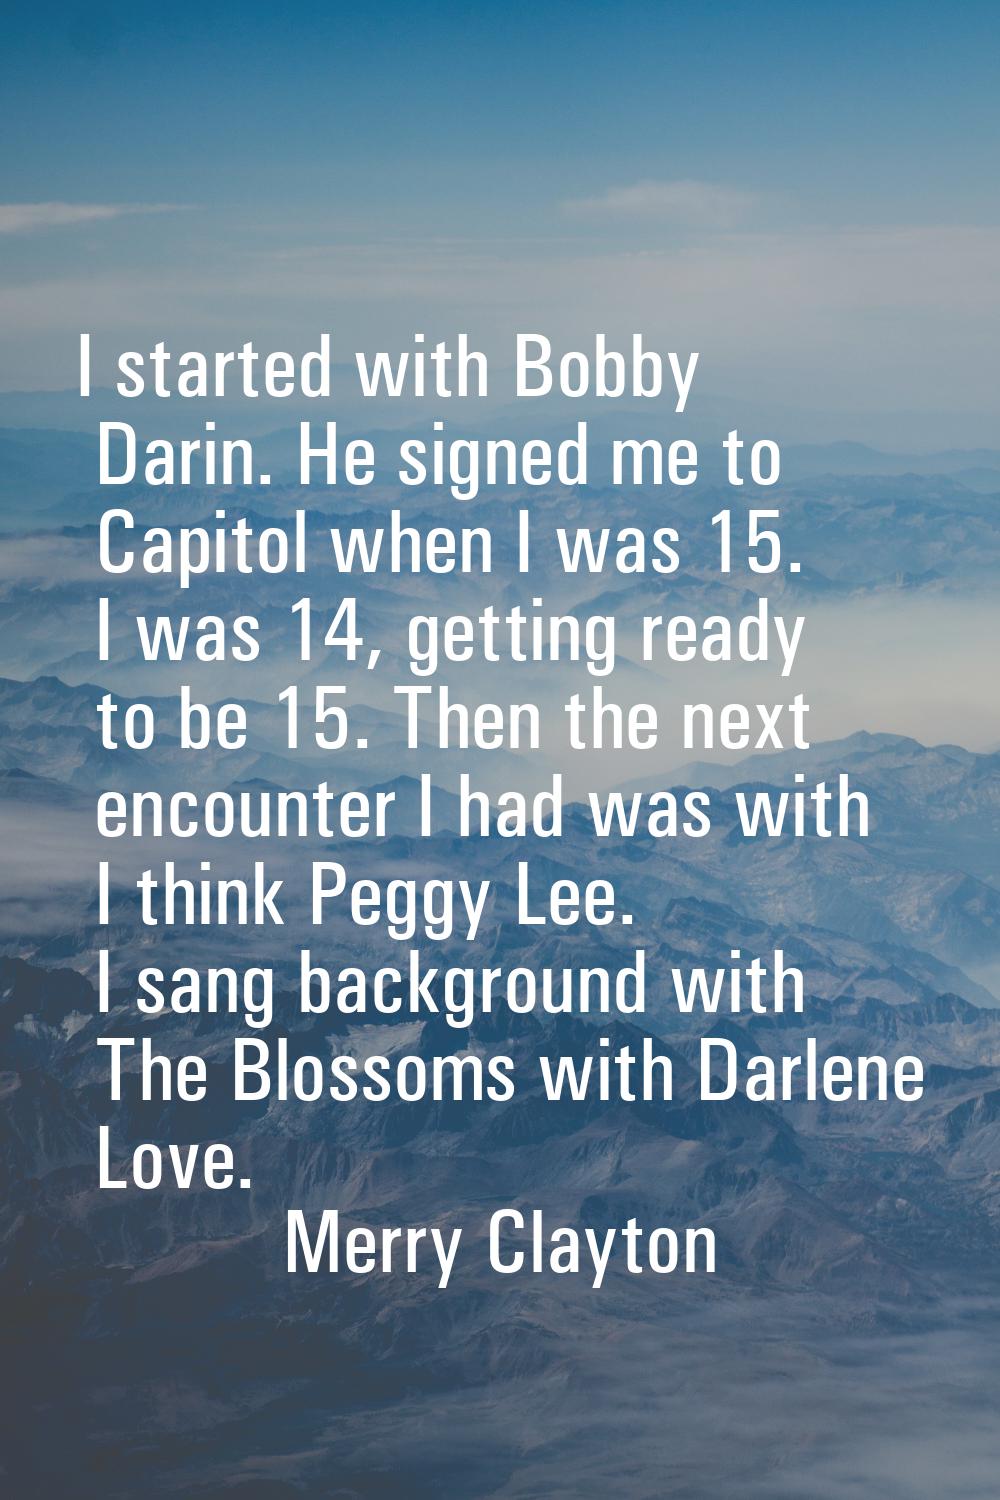 I started with Bobby Darin. He signed me to Capitol when I was 15. I was 14, getting ready to be 15